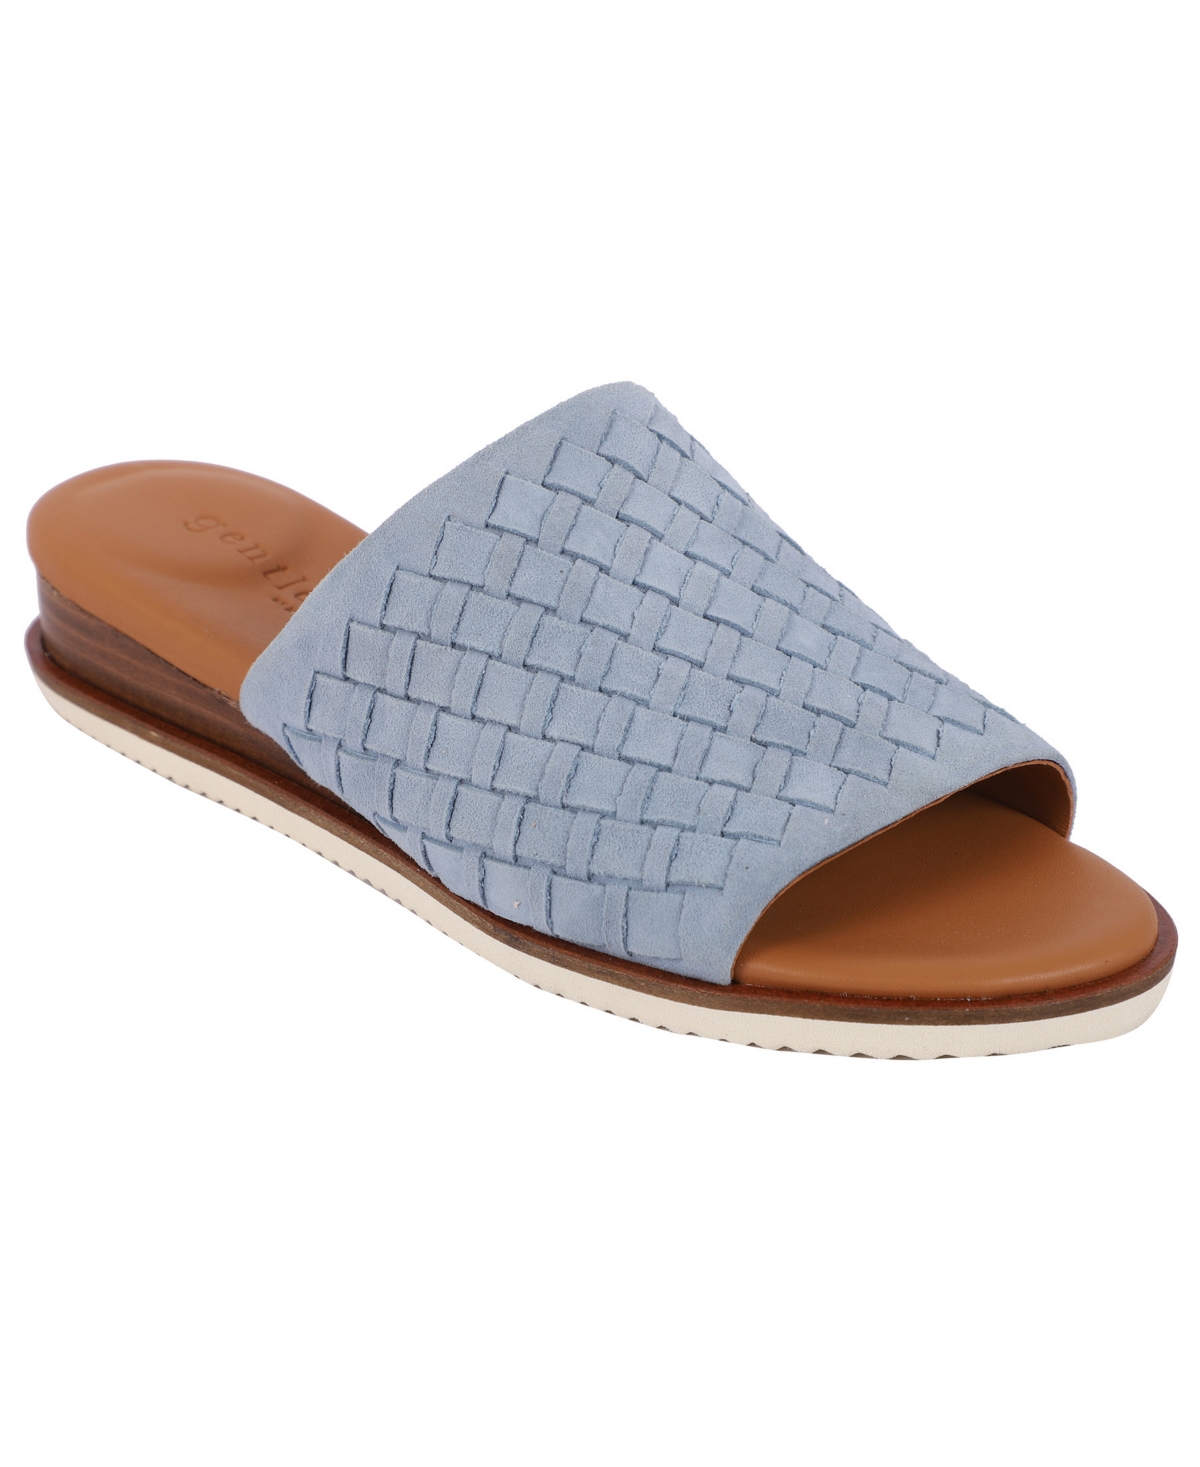 Women's Angie Wedge Slip-On Sandals - Light Blue Suede